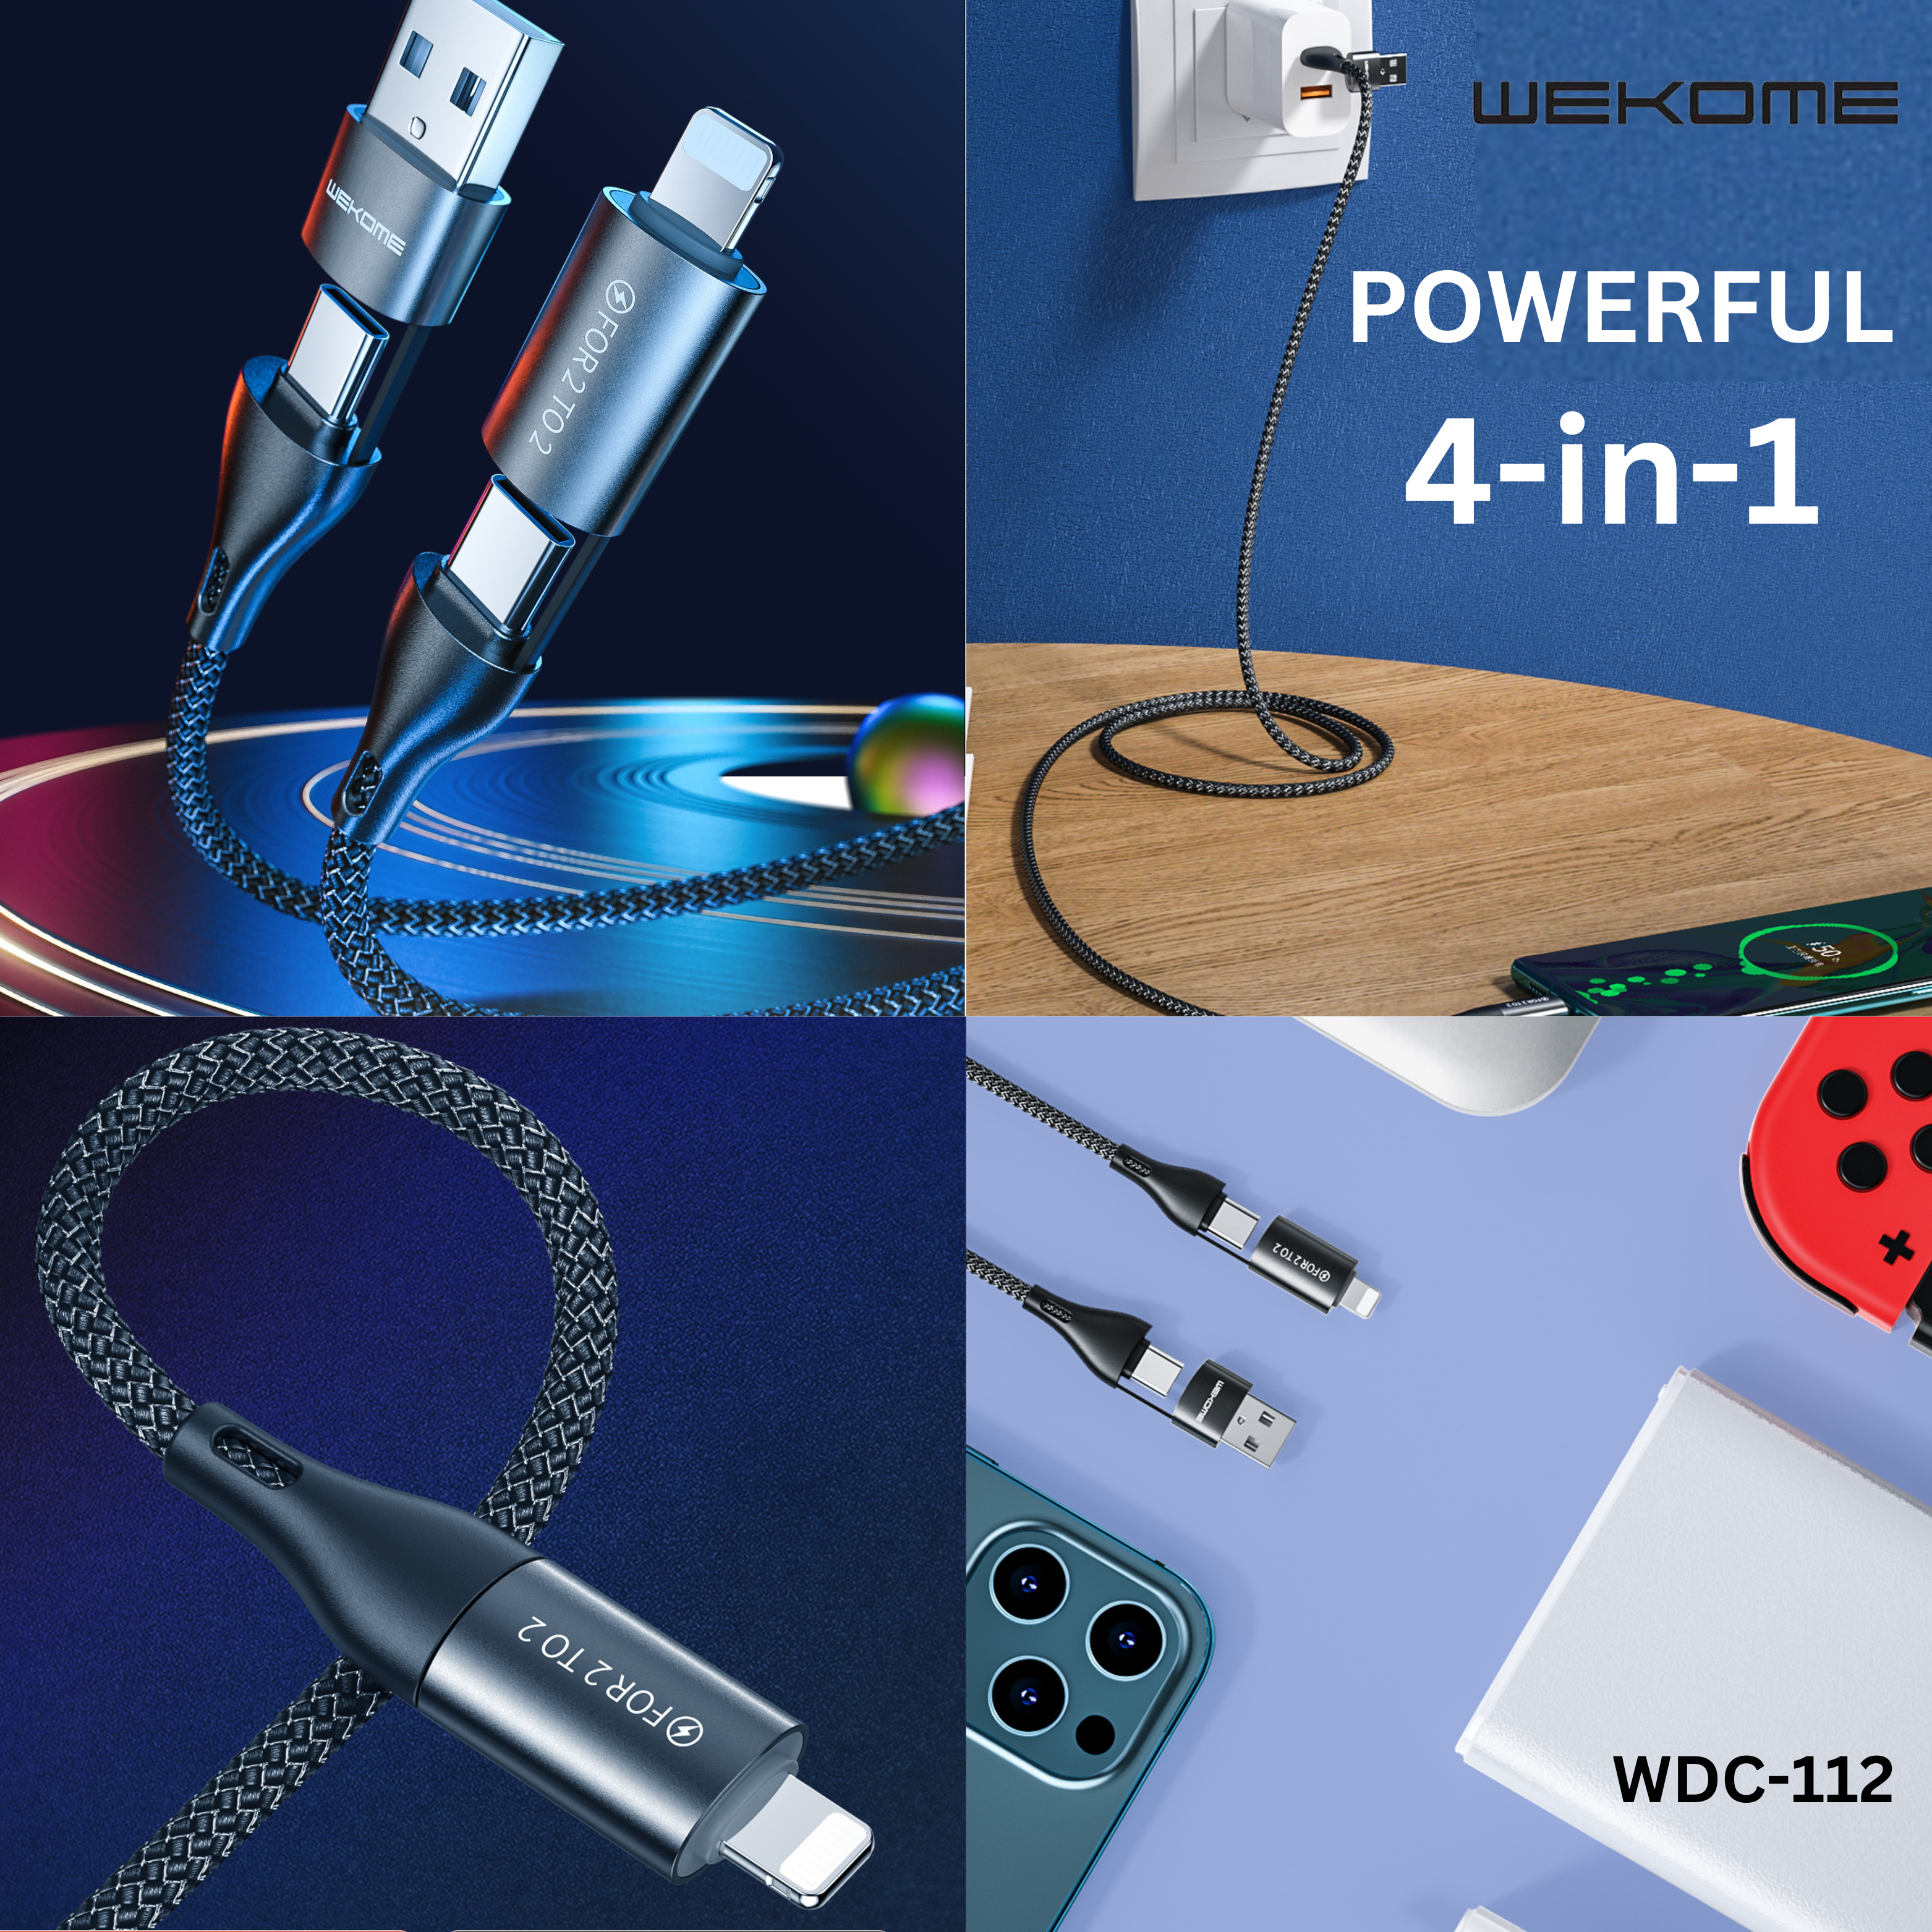 WEKOME 4 in 1 Cables (WDC-112) ALL IN ONE 3A MAX 4 IN 1 FAST CHARGING DATA CABLE FOR IPH,TYPE-C (1M)(TYPE-C *2/IPH/USB), Fast Chargign Cable for Android and iPhone, All in One Cable-Black